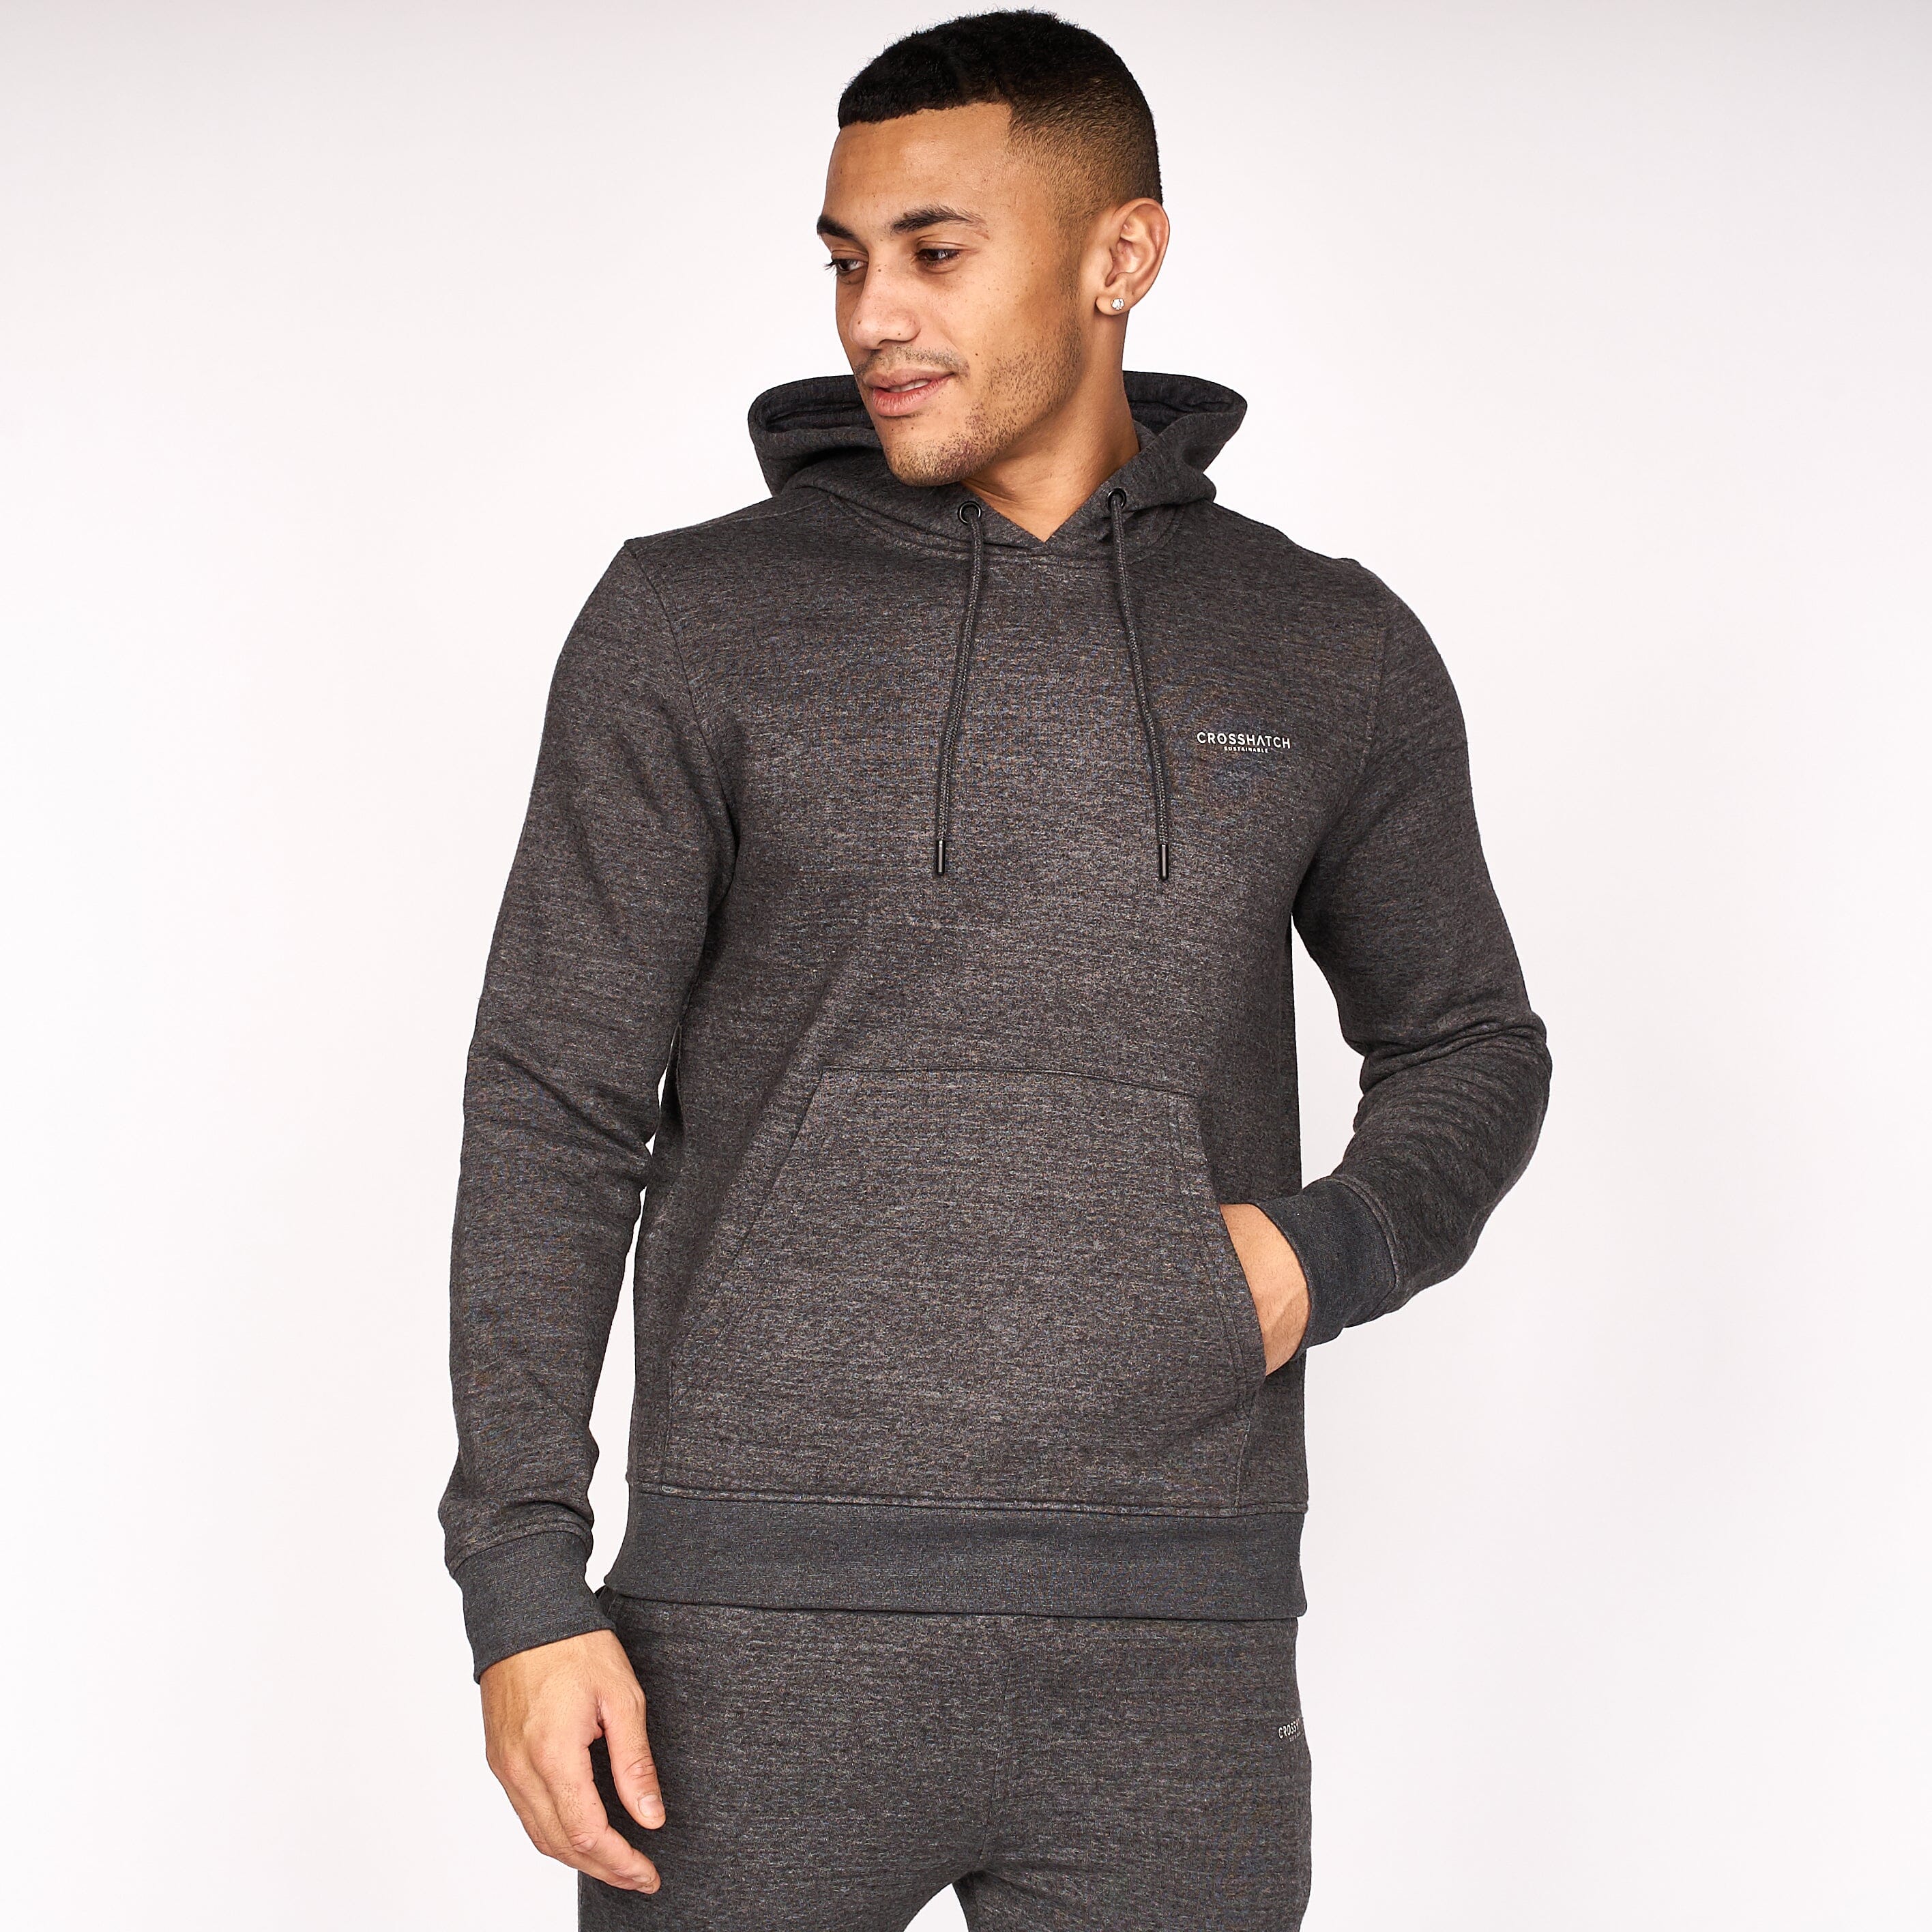 Chelmere Tracksuit Charcoal Marl